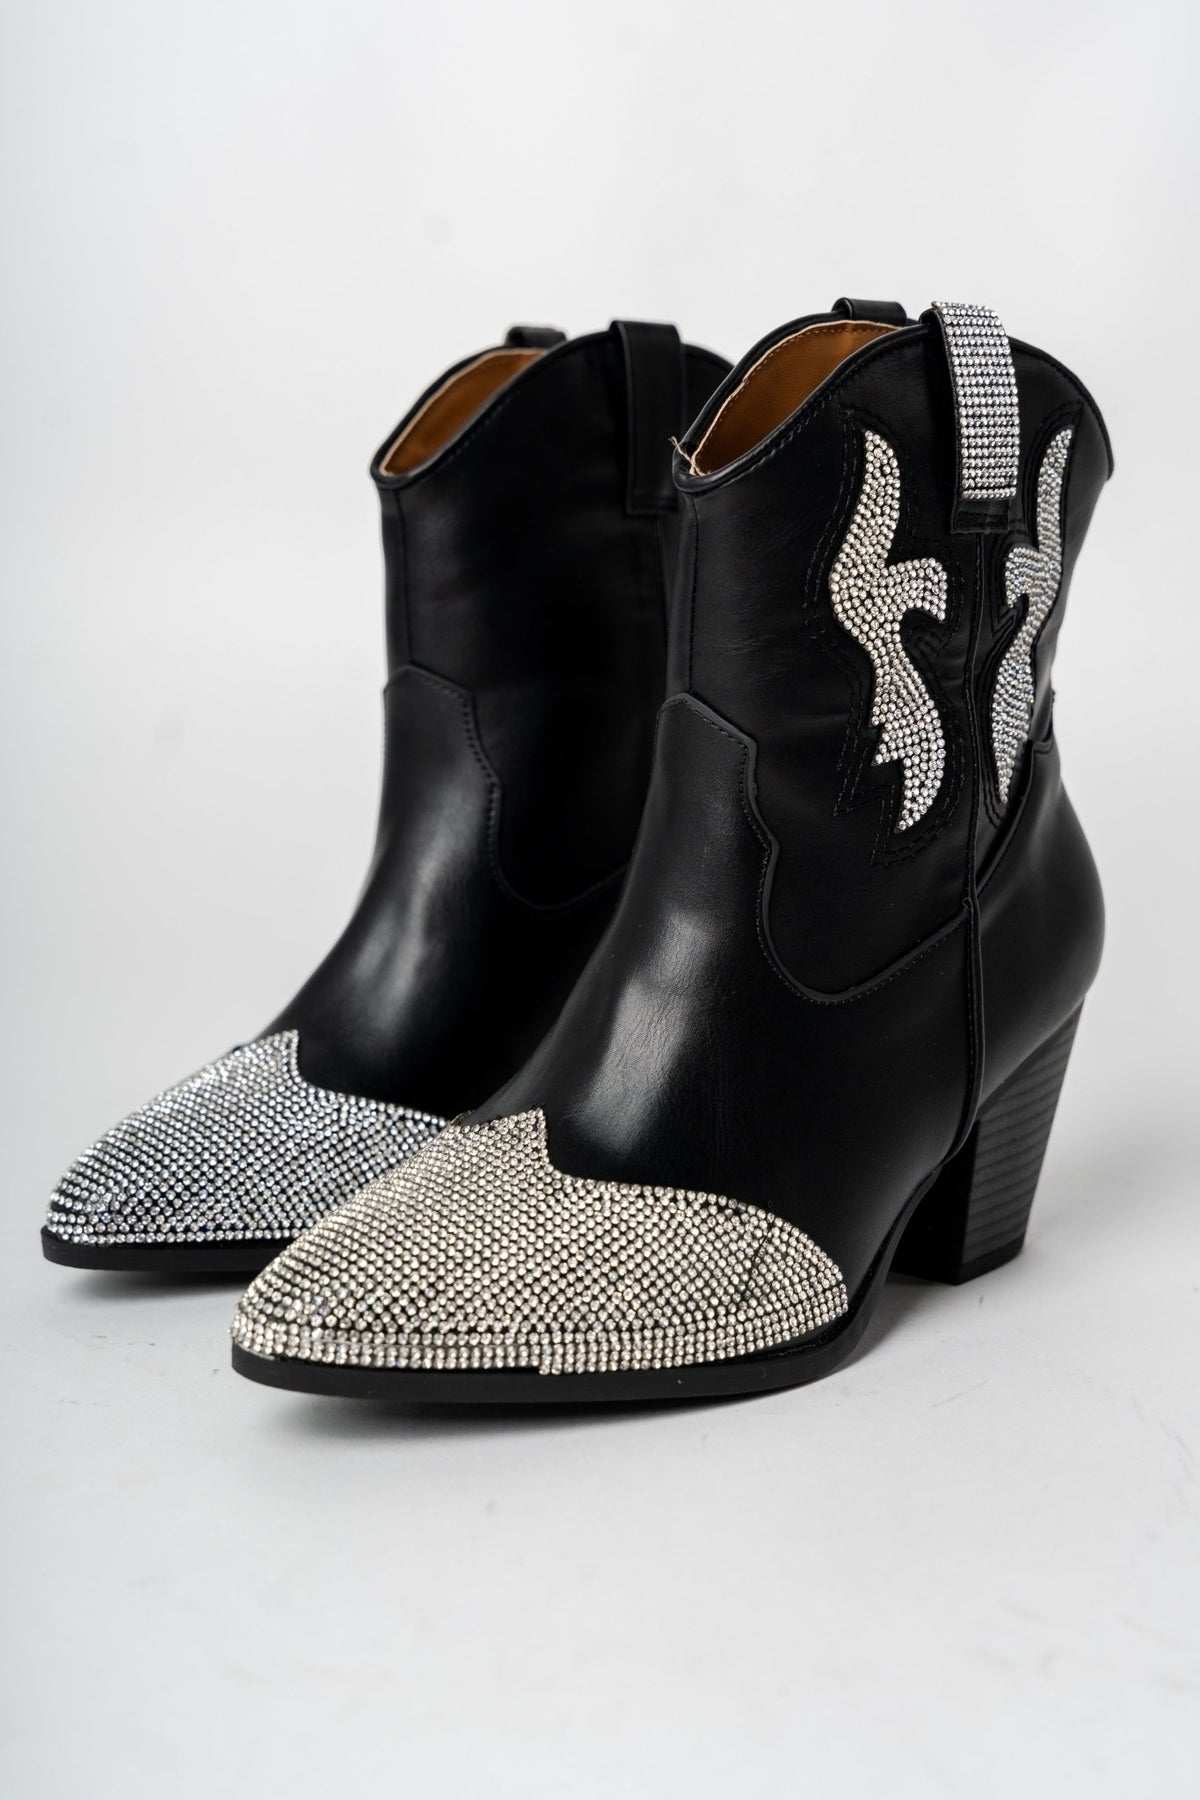 Zane embellished western bootie black - Cute shoes - Trendy Shoes at Lush Fashion Lounge Boutique in Oklahoma City